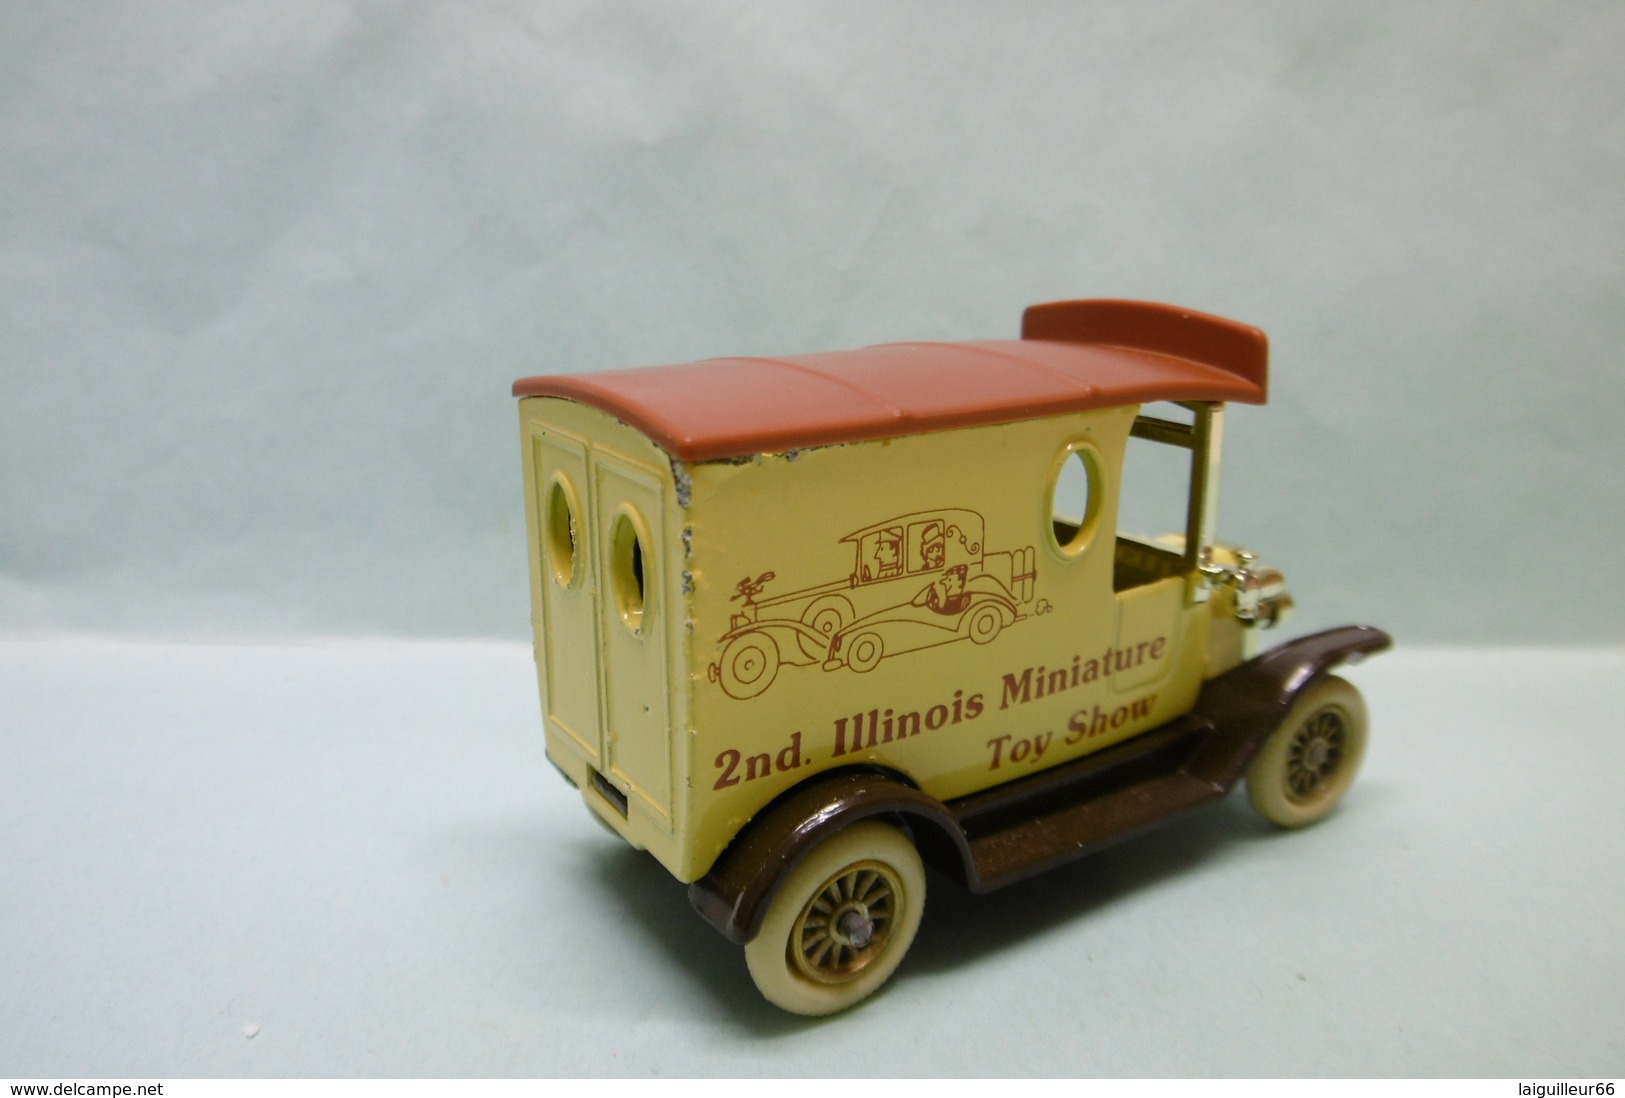 Lledo Days Gone - FORD MODEL T Van Fourgon 1920 2nd Illinois Miniature Toy Show BO - Commercial Vehicles